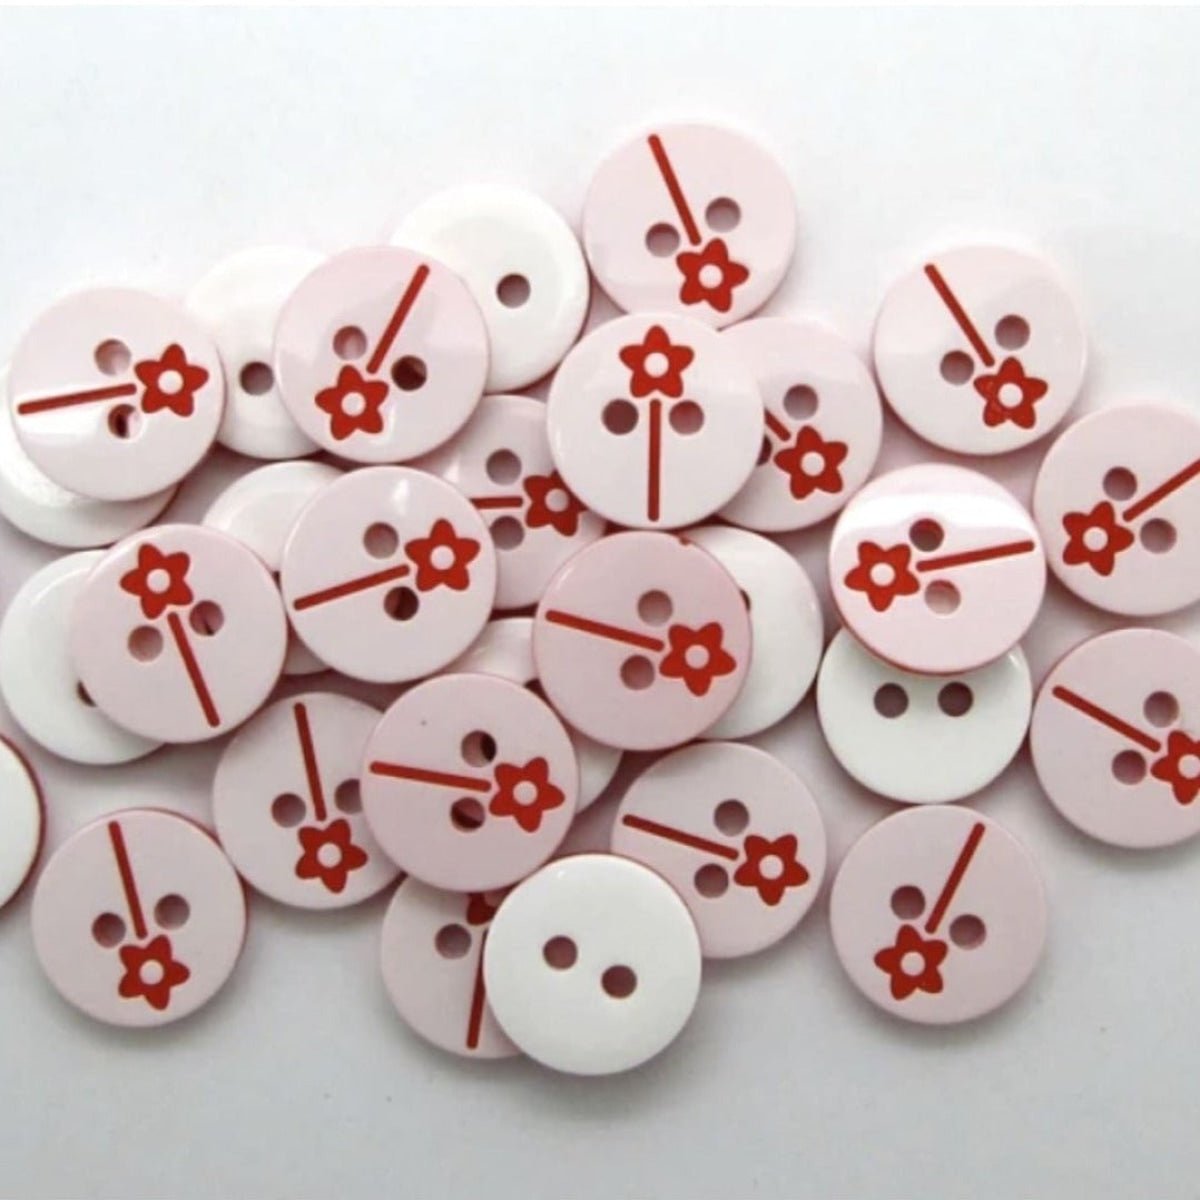 100pcs 12.5mm 2 Holes Mixed Round Flower Resin Buttons For Clothes Crafts Sewing Scrapbooking - - Asia Sell